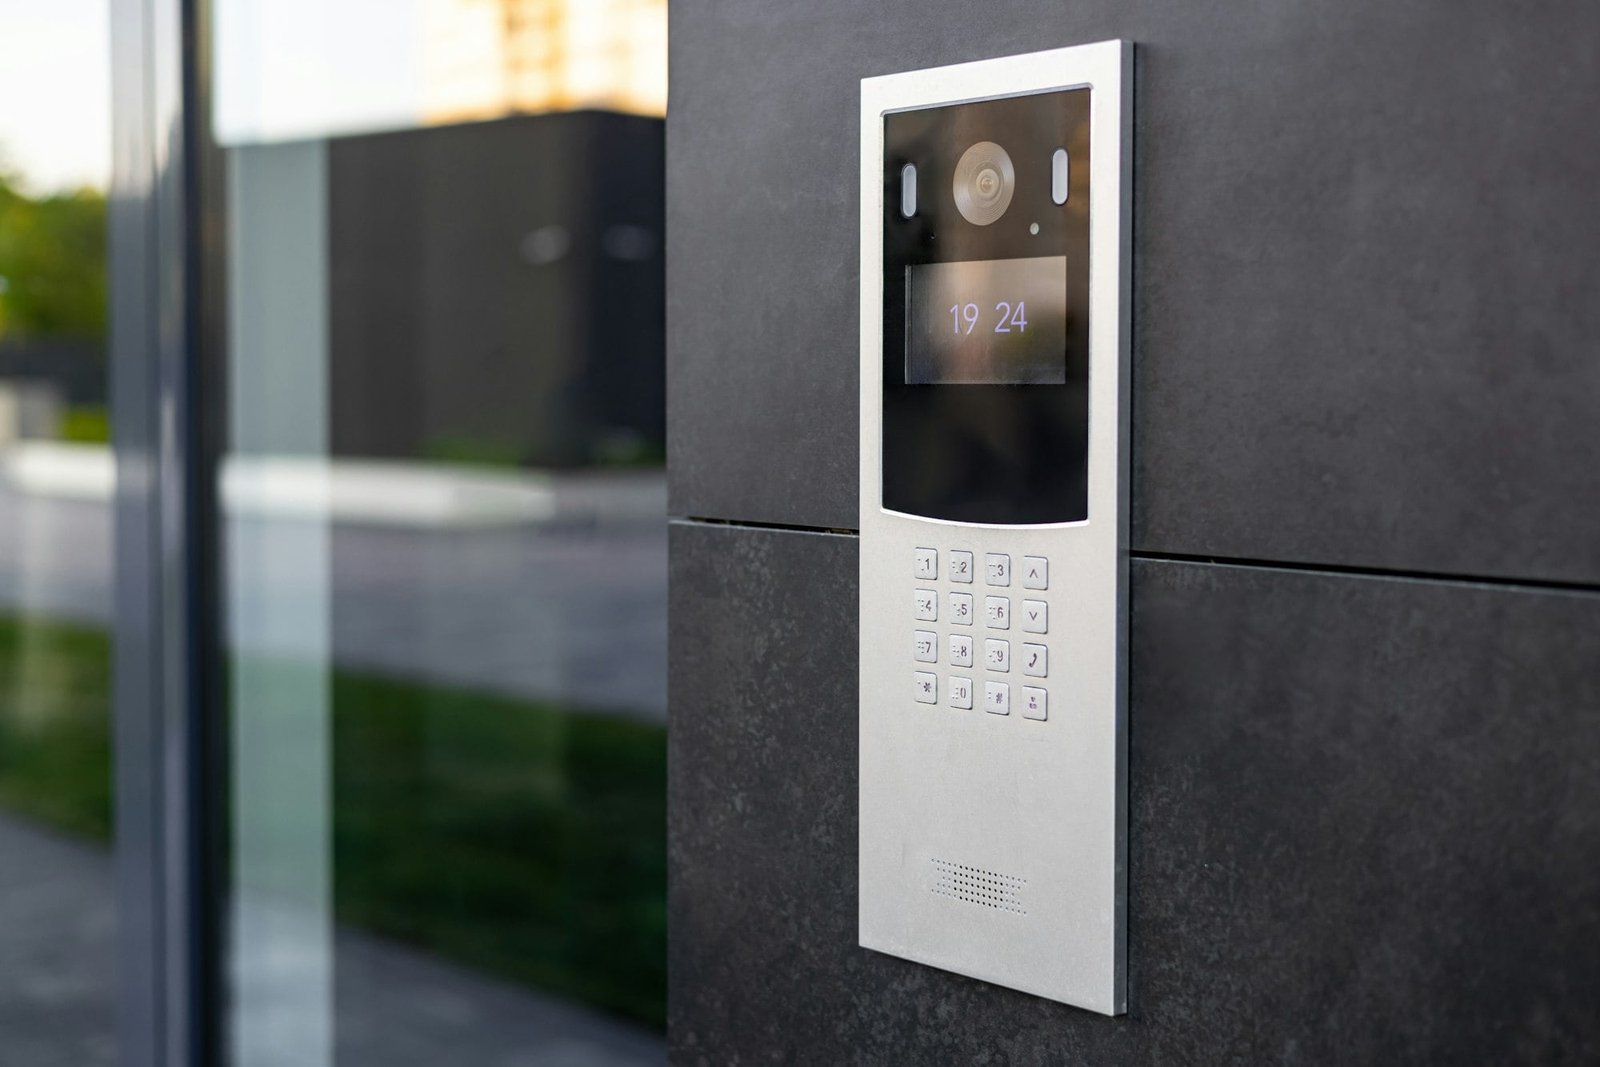 Entrance doorbell in a multi-apartment building, with a video surveillance camera, on a dark wall